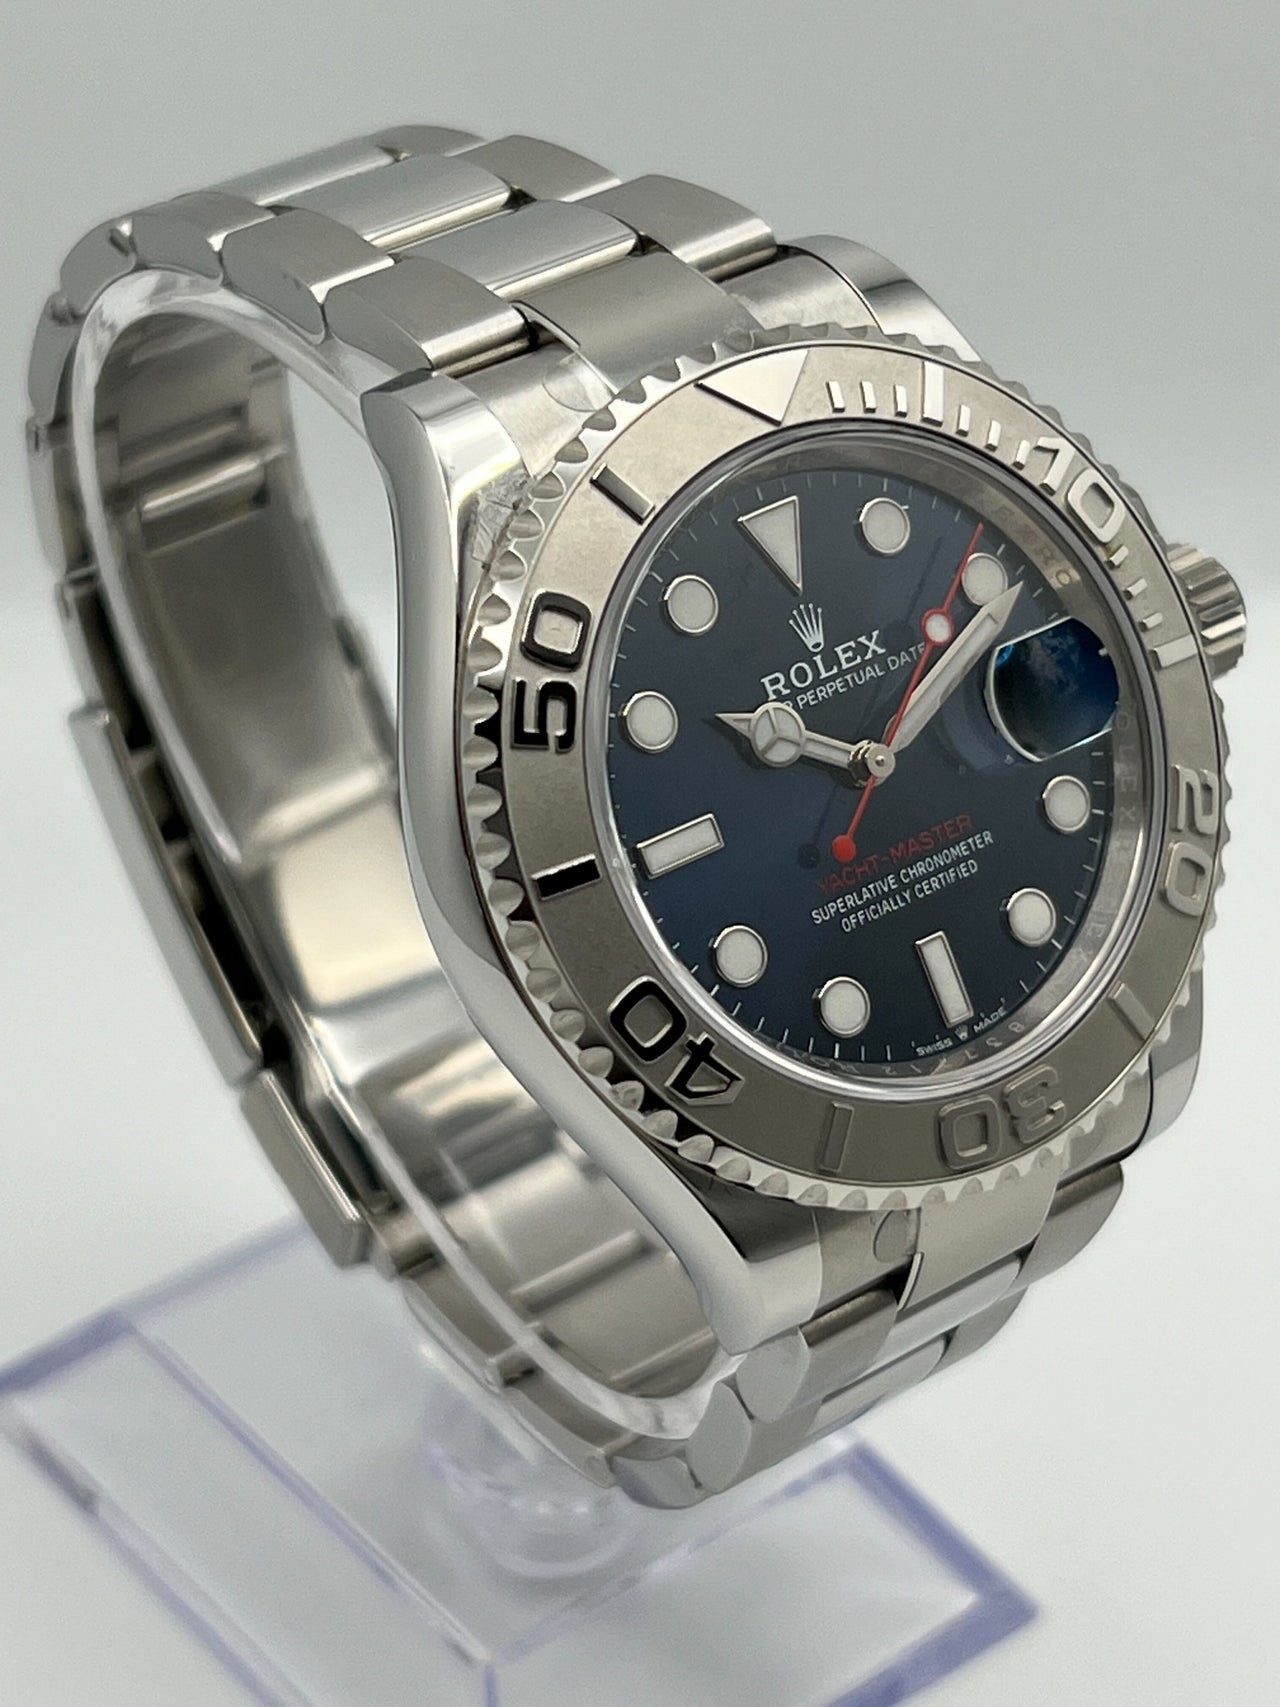 Rolex Yacht-Master 126622 Stainless Steel Blue Dial (2019)